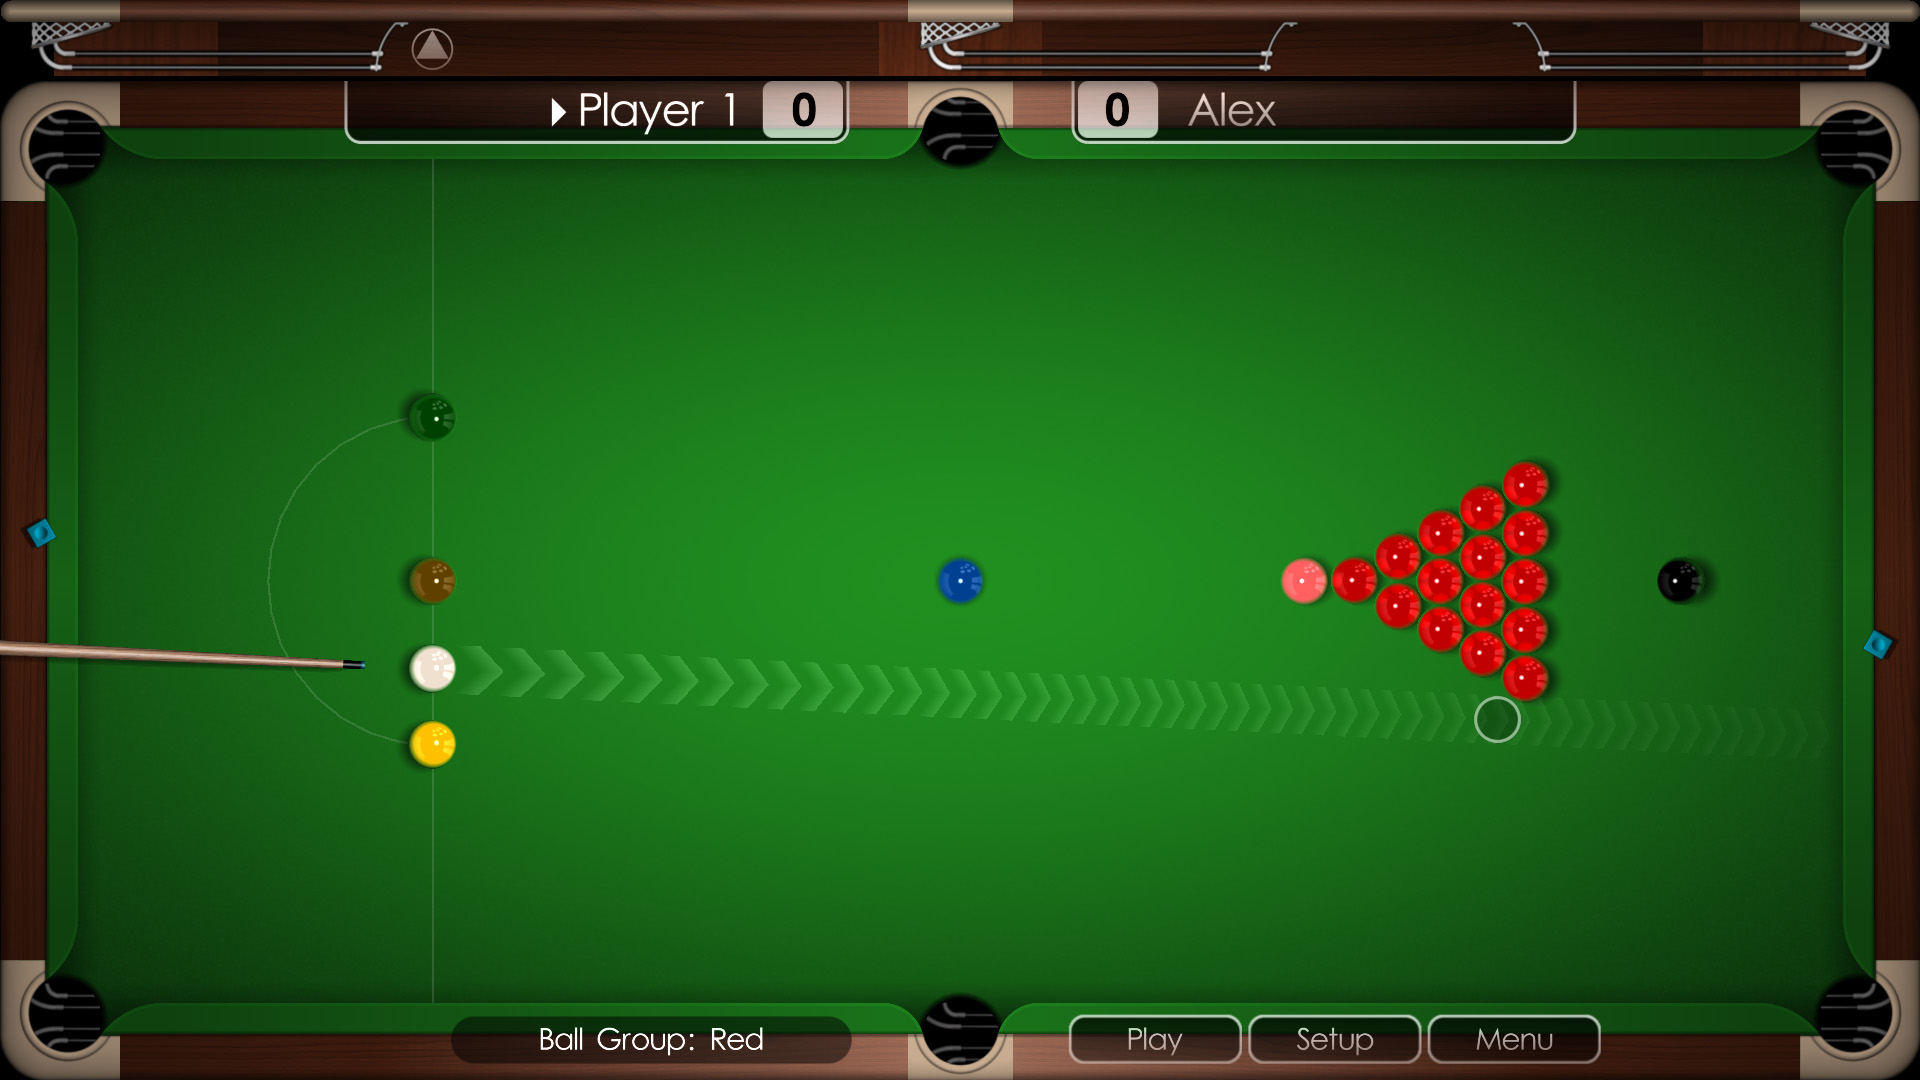 Download Cue Club 2 Pool Snooker Full Pc Game